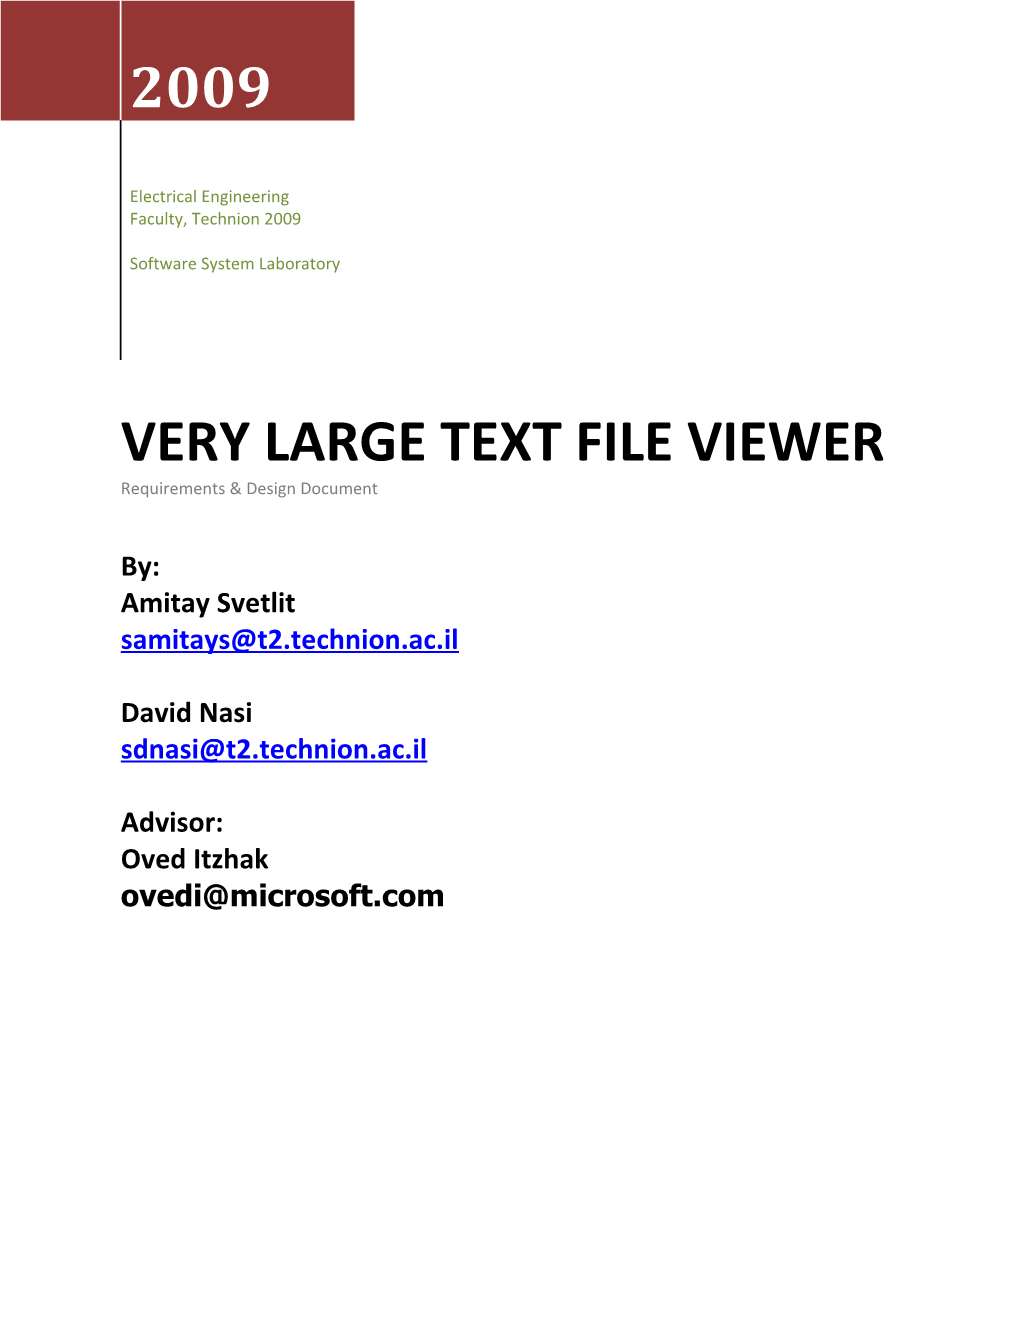 Very Large Text File Viewer